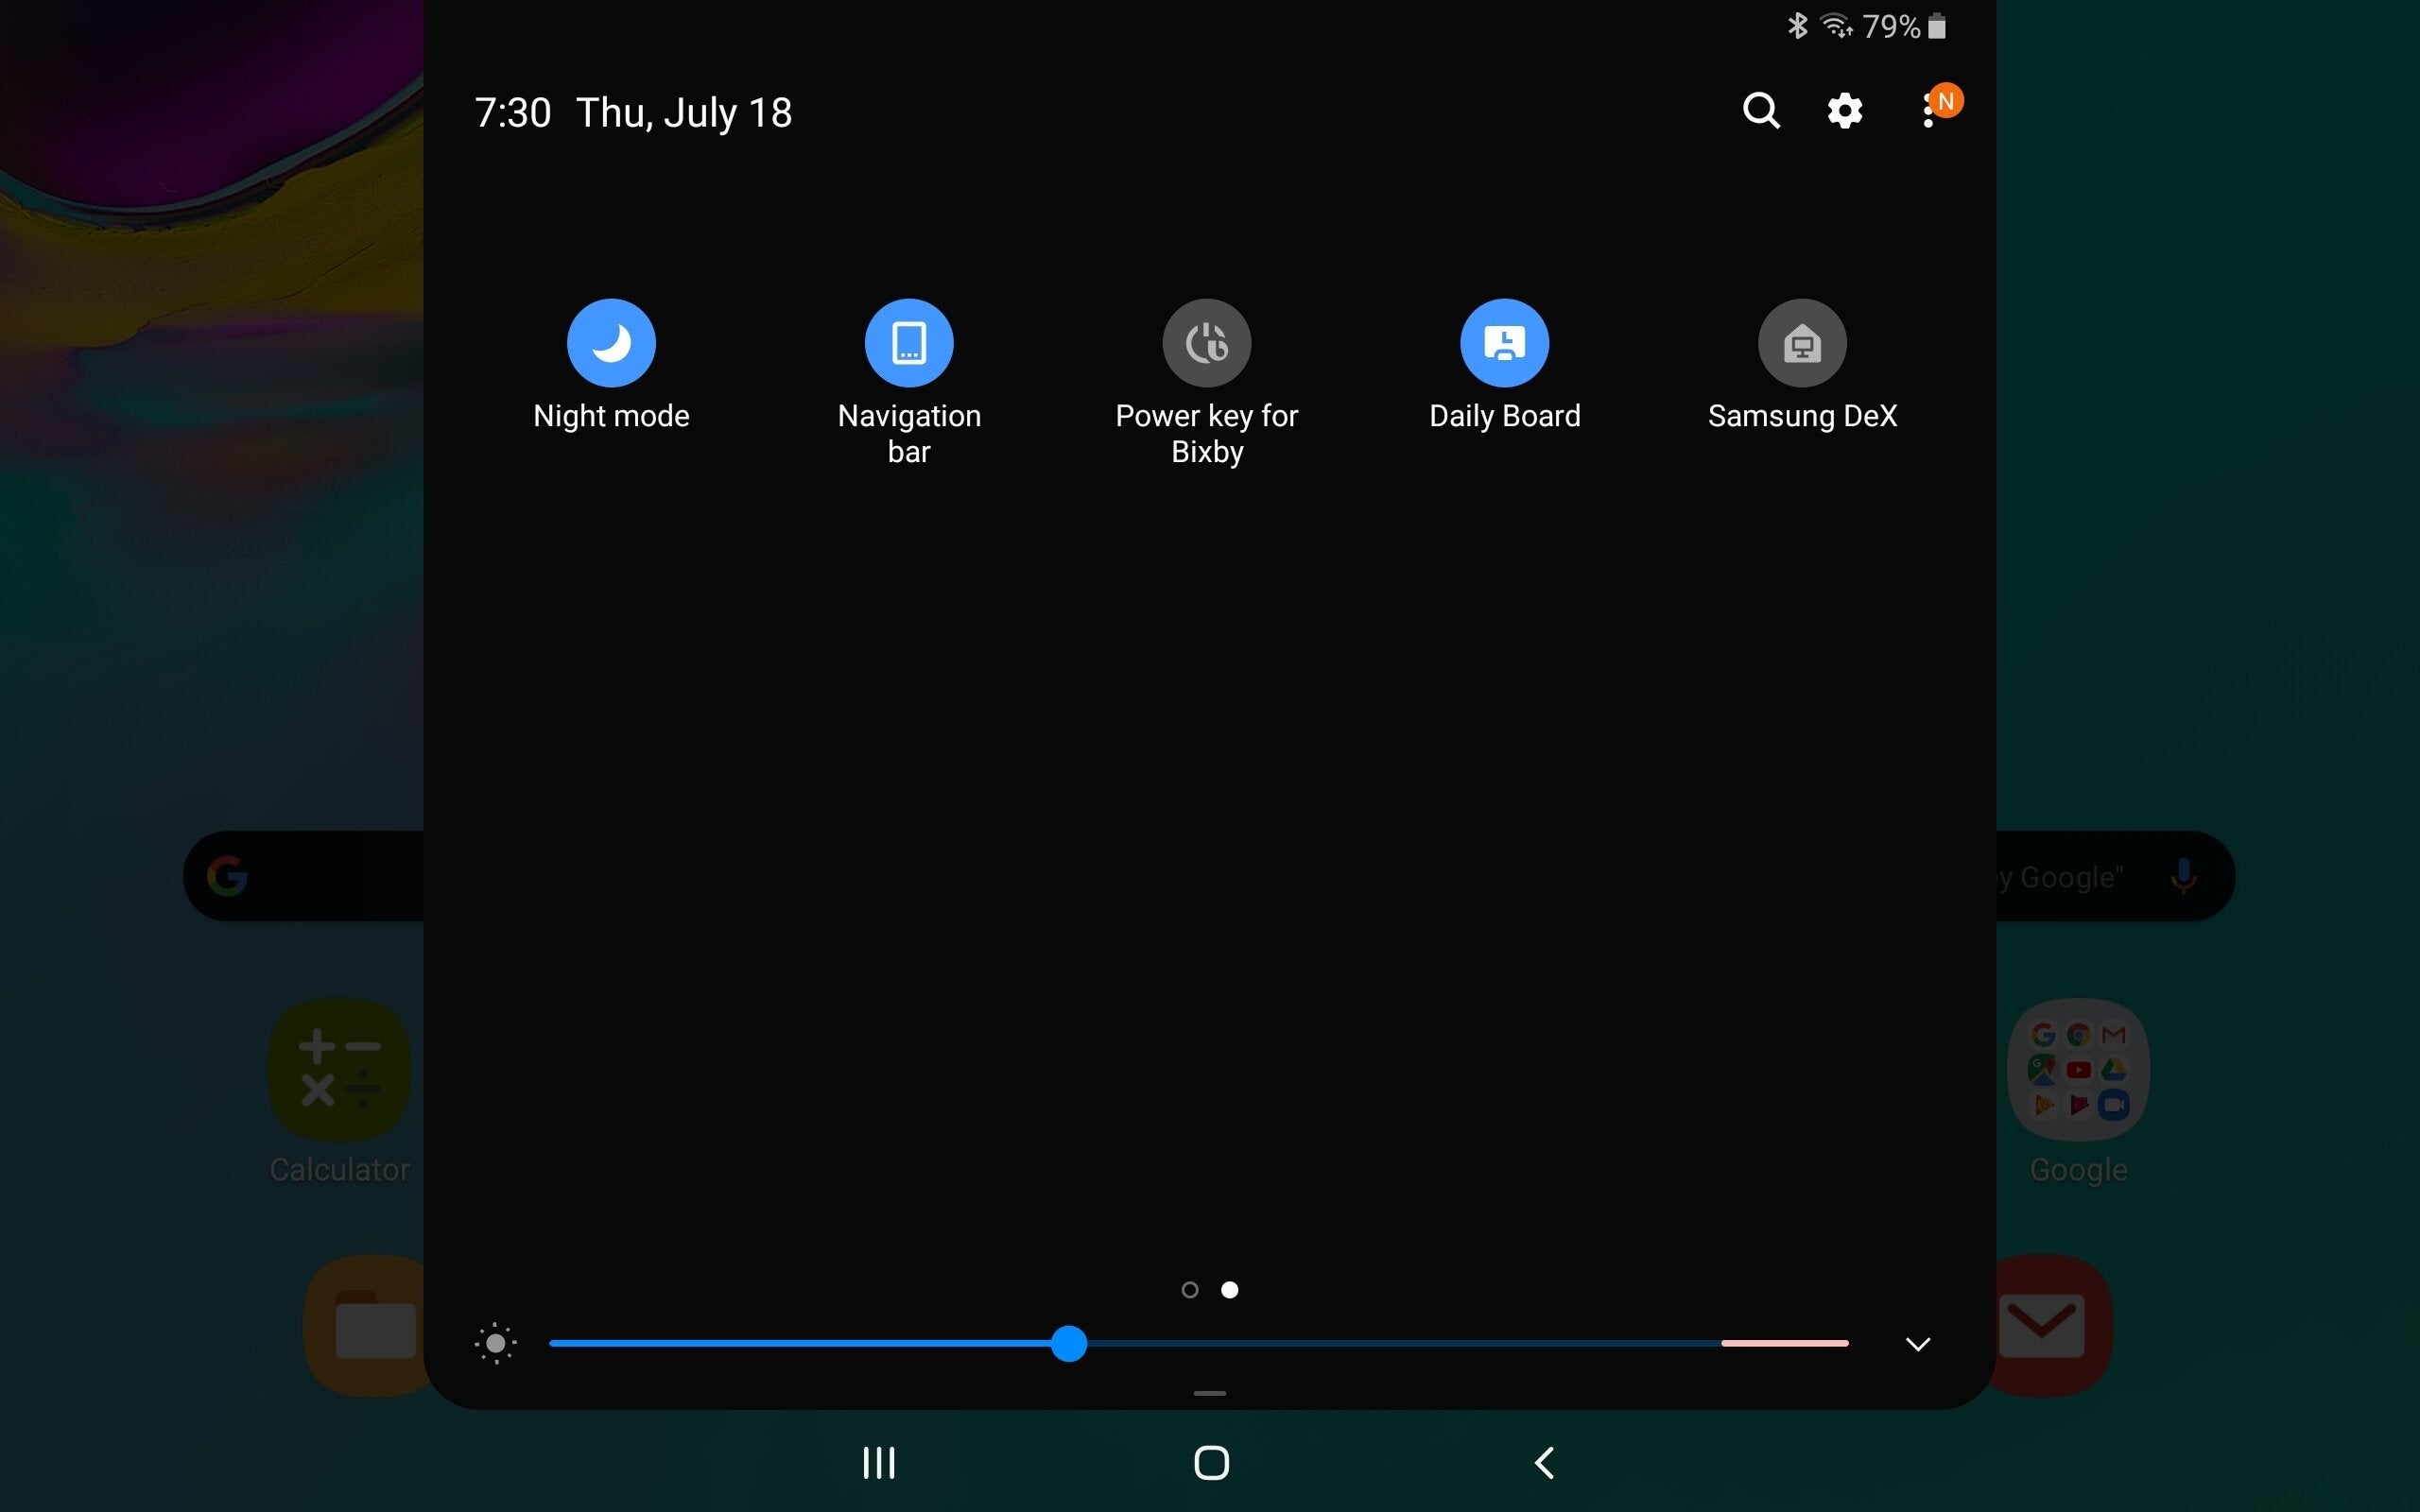 Power key for Bixby toggle - Samsung Galaxy Tab S5e update adds Bixby Voice support